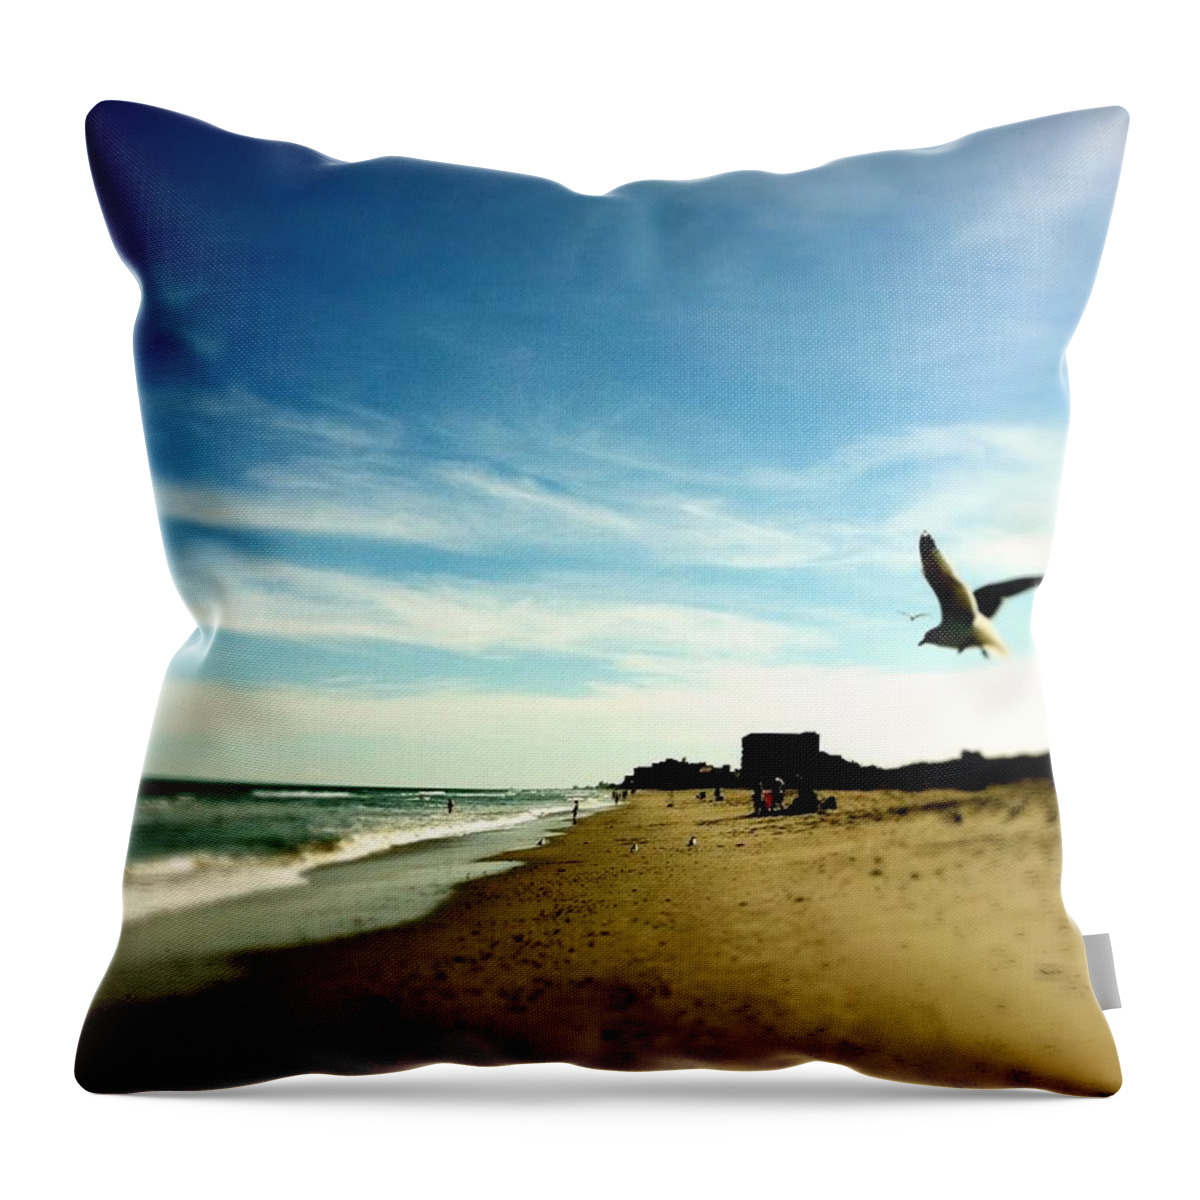 Majestic Throw Pillow featuring the photograph Seagulls At The Beach. #1 by Carlos Avila